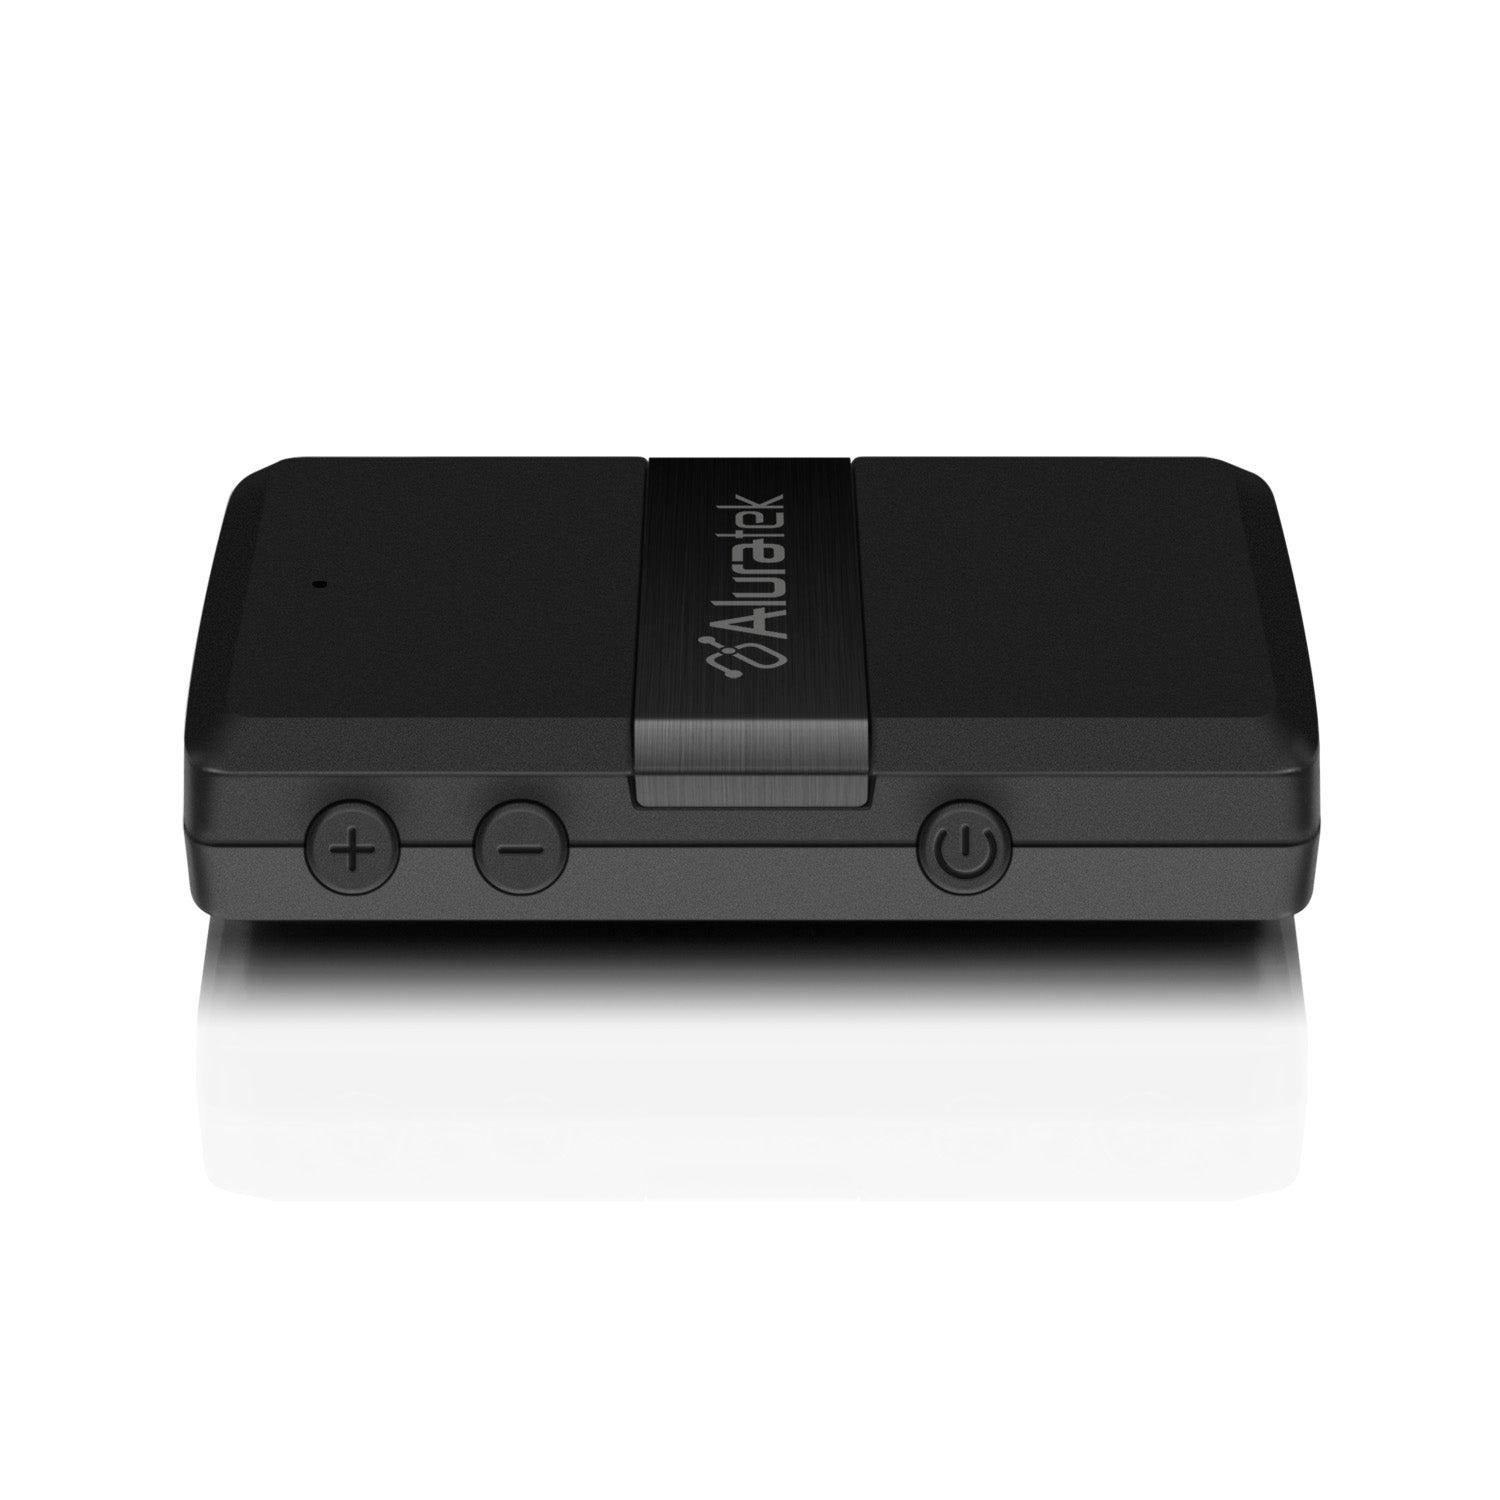 Do I Need a Bluetooth Transmitter or Receiver?